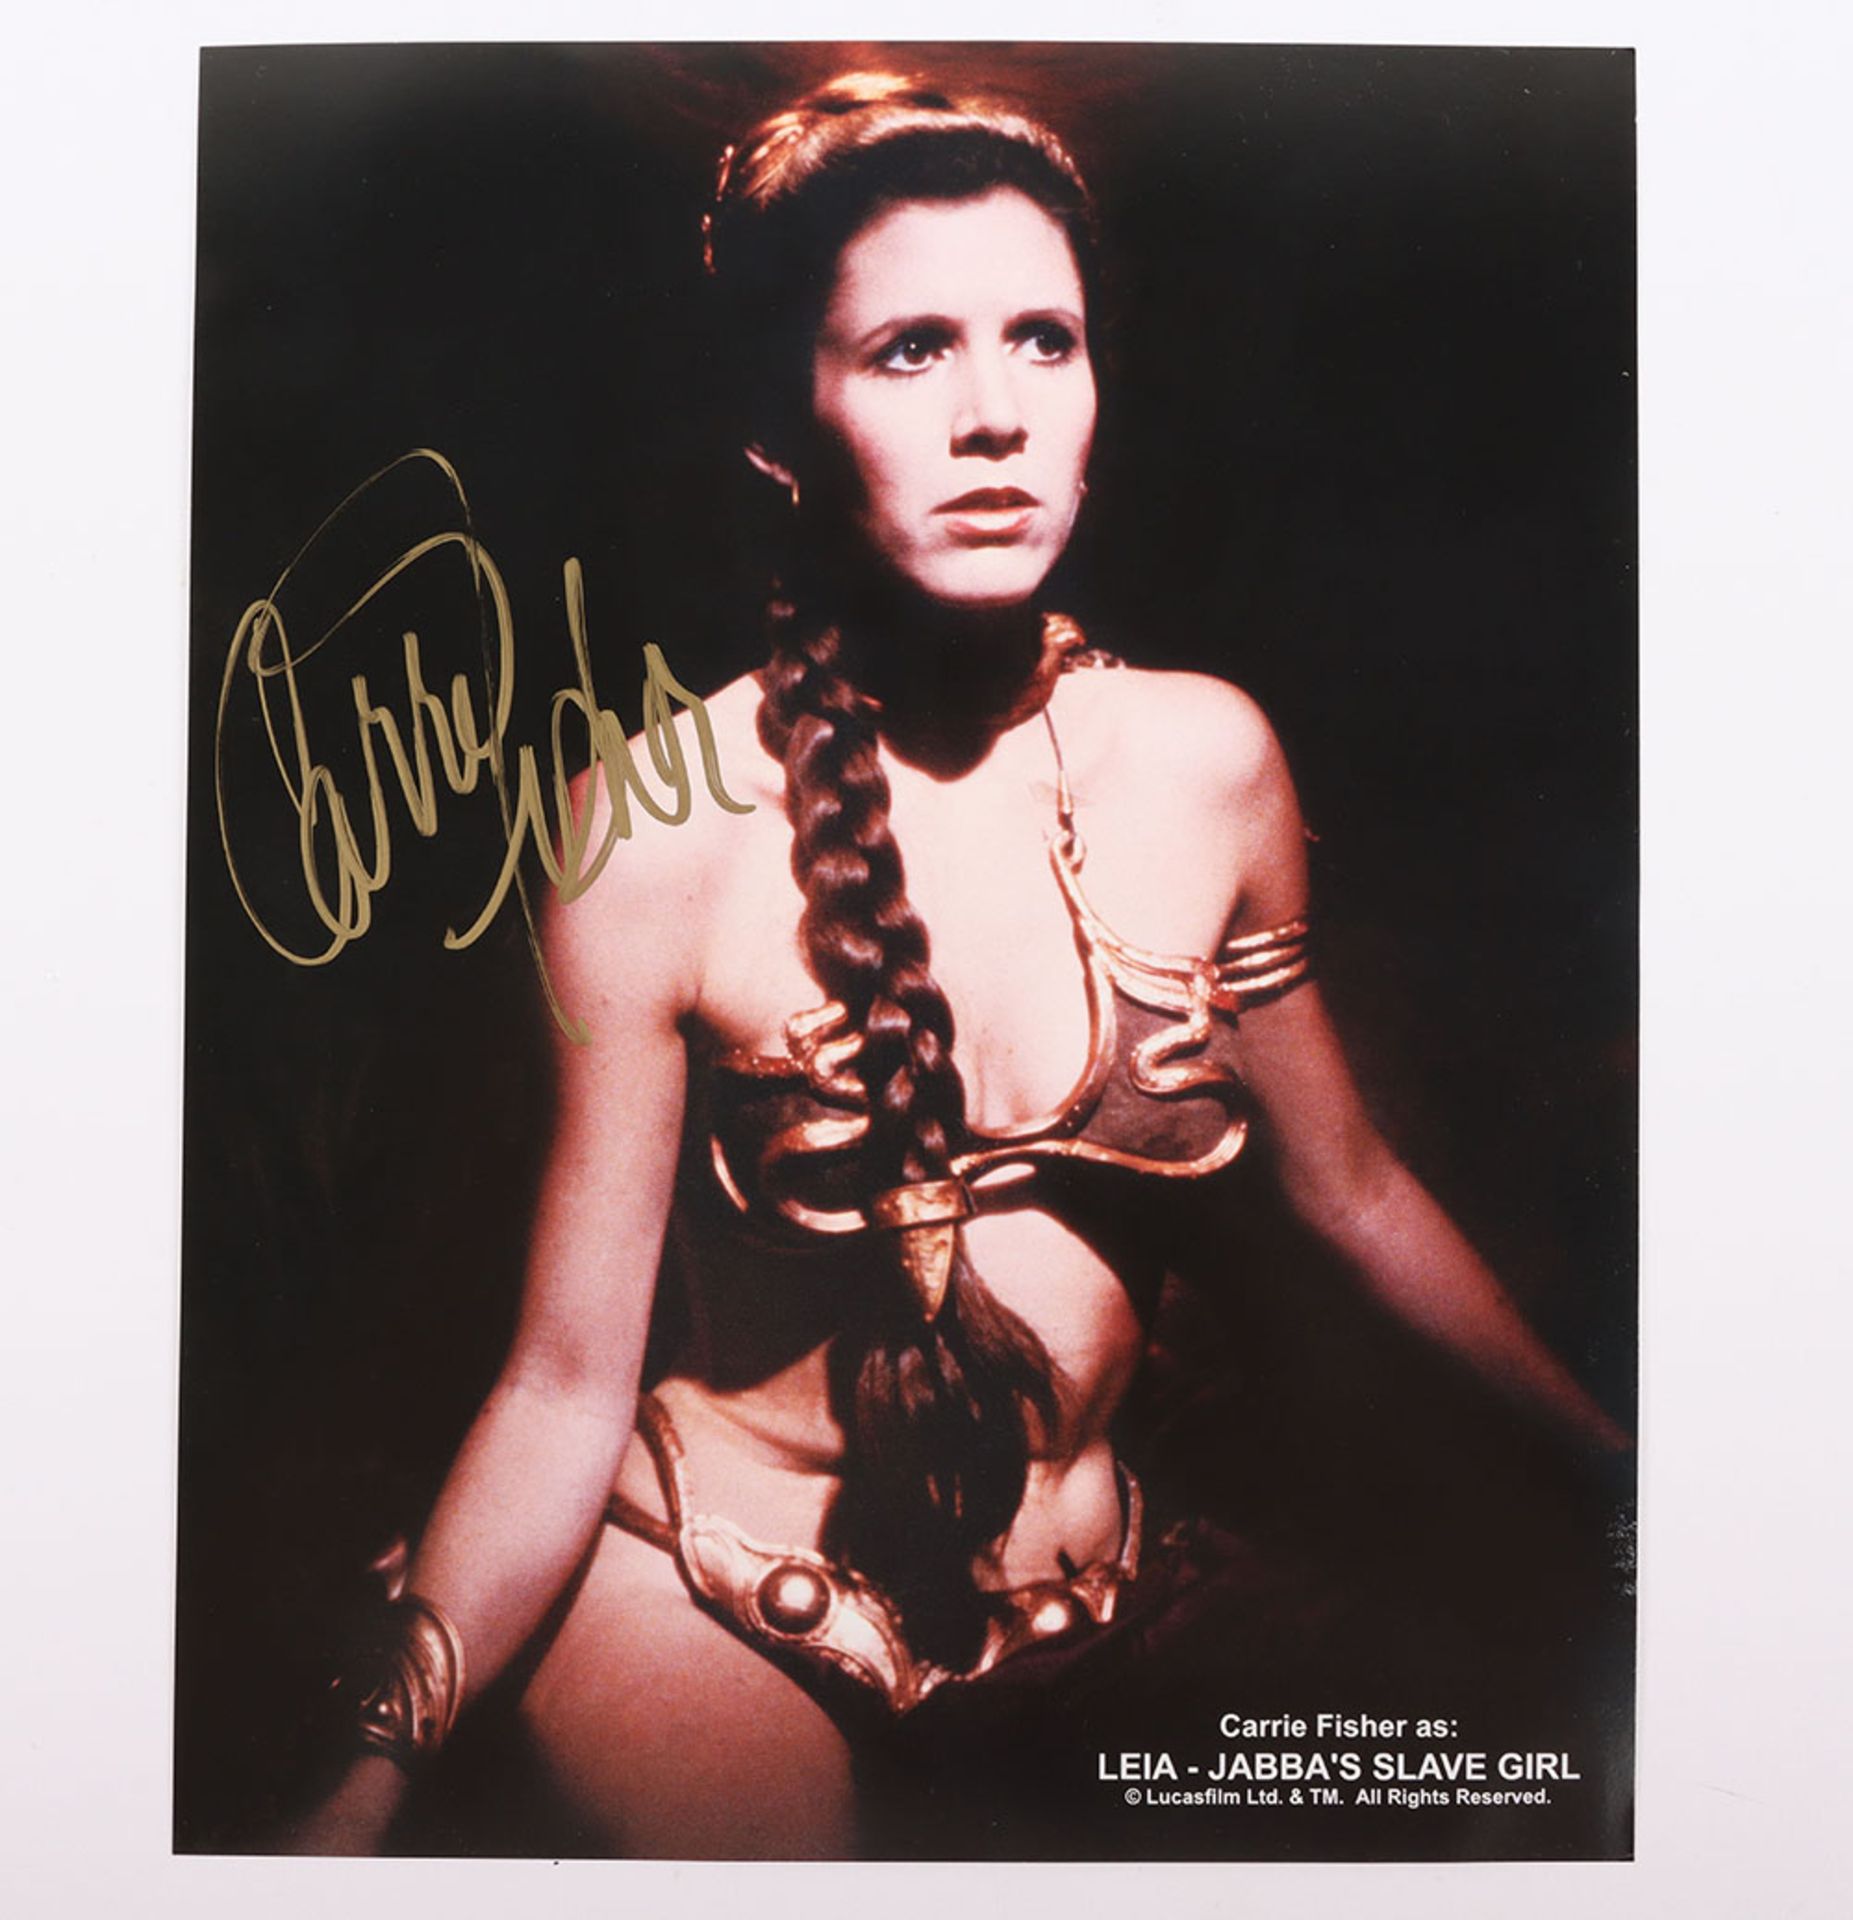 A Original Star Wars Signed Princess Leia Photograph Carrie Fisher (1956-2016)